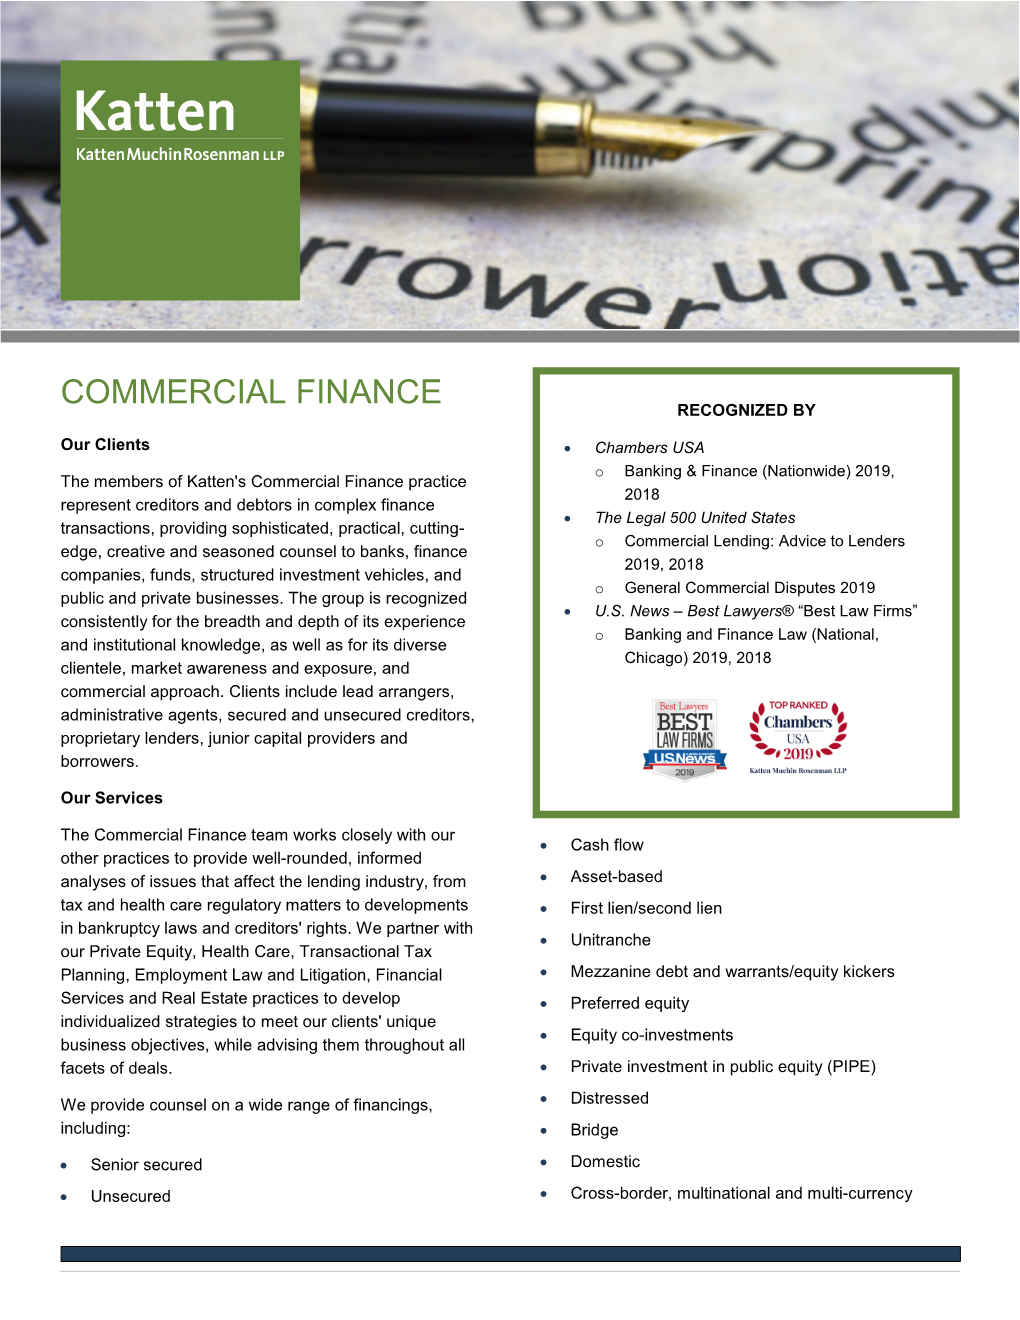 Commercial Finance Recognized By